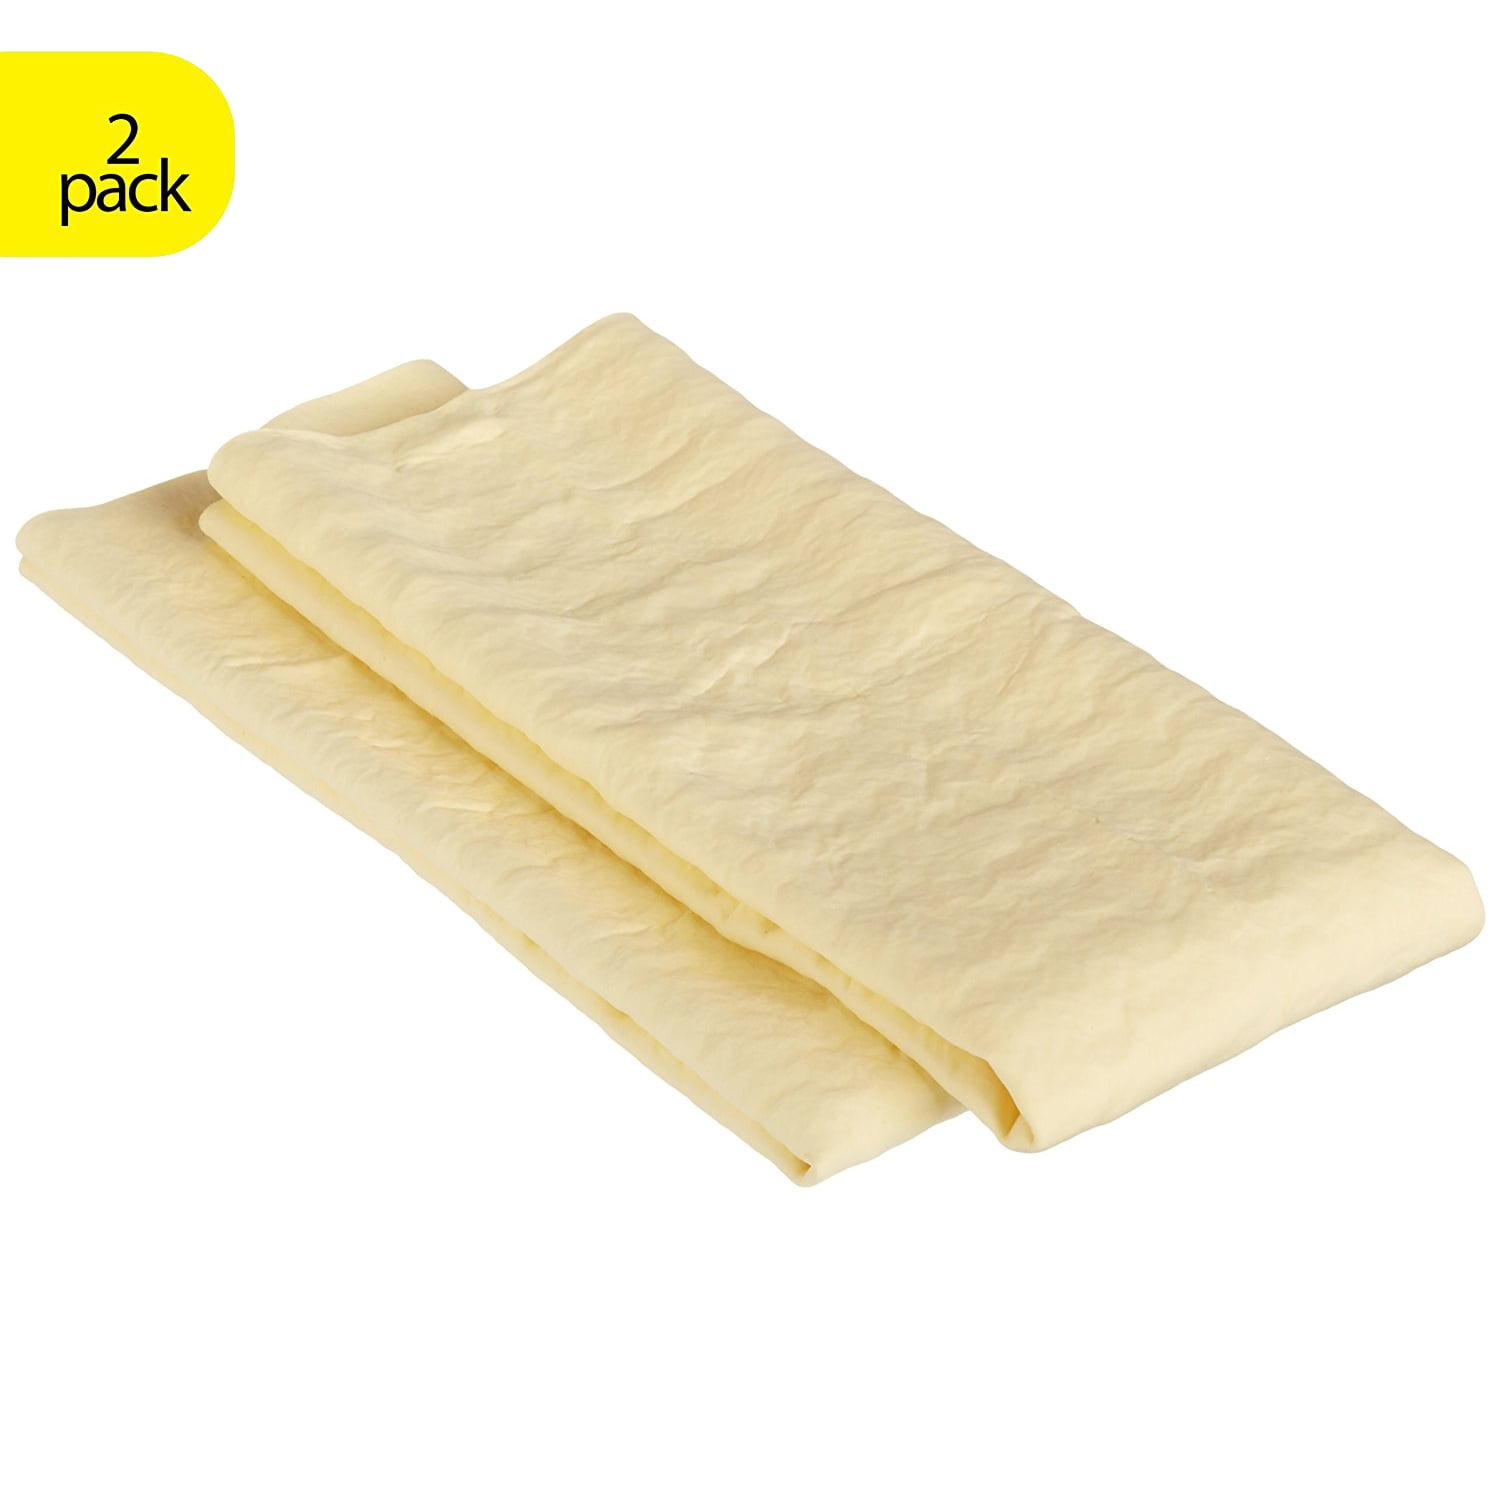 Chamois Cloth for Car, Car Wash Drying Towels Extra Large 37.8'' X